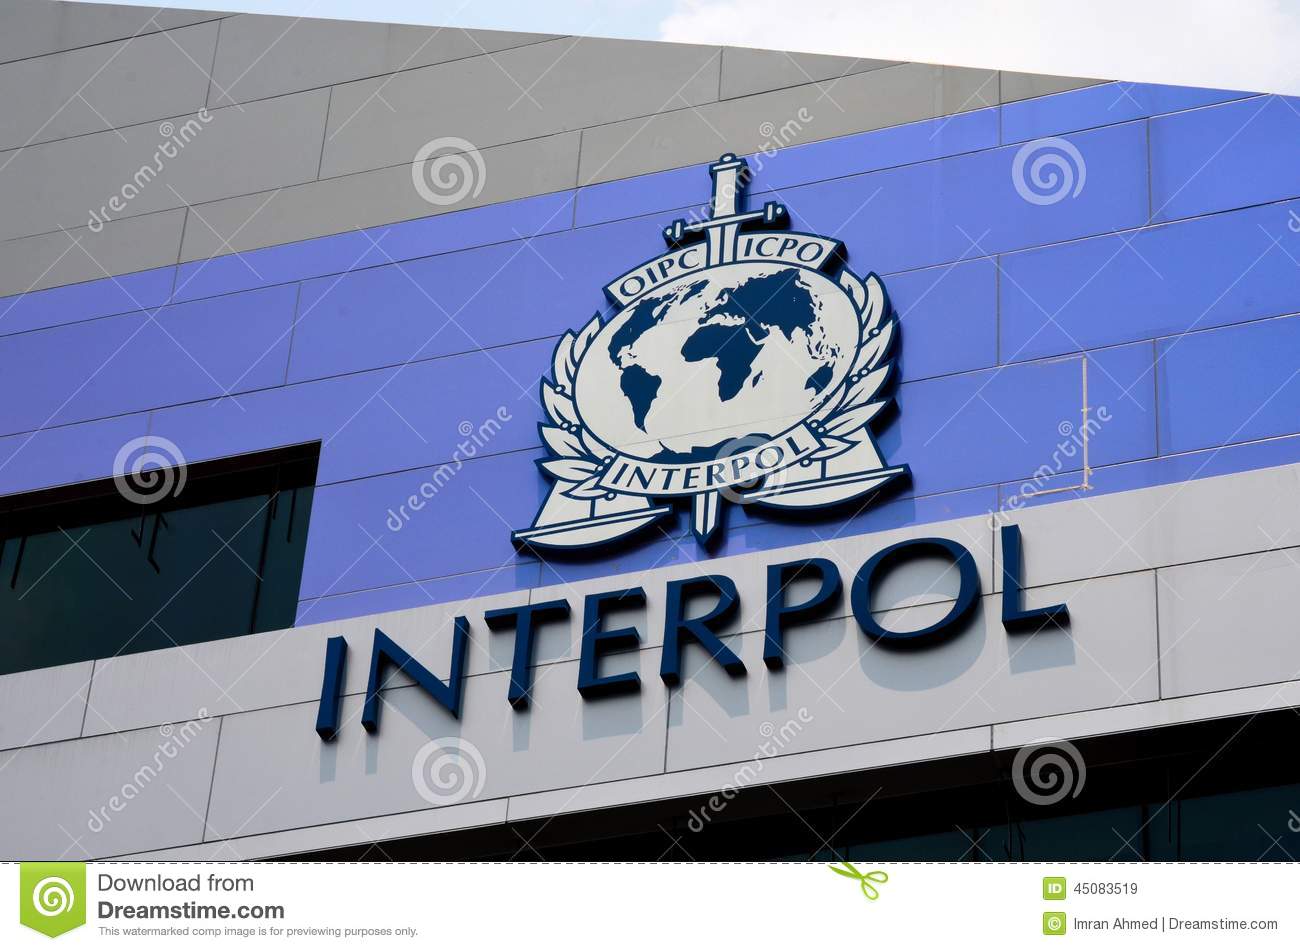 Morocco nabs Hezbollah member wanted by Interpol for fraud